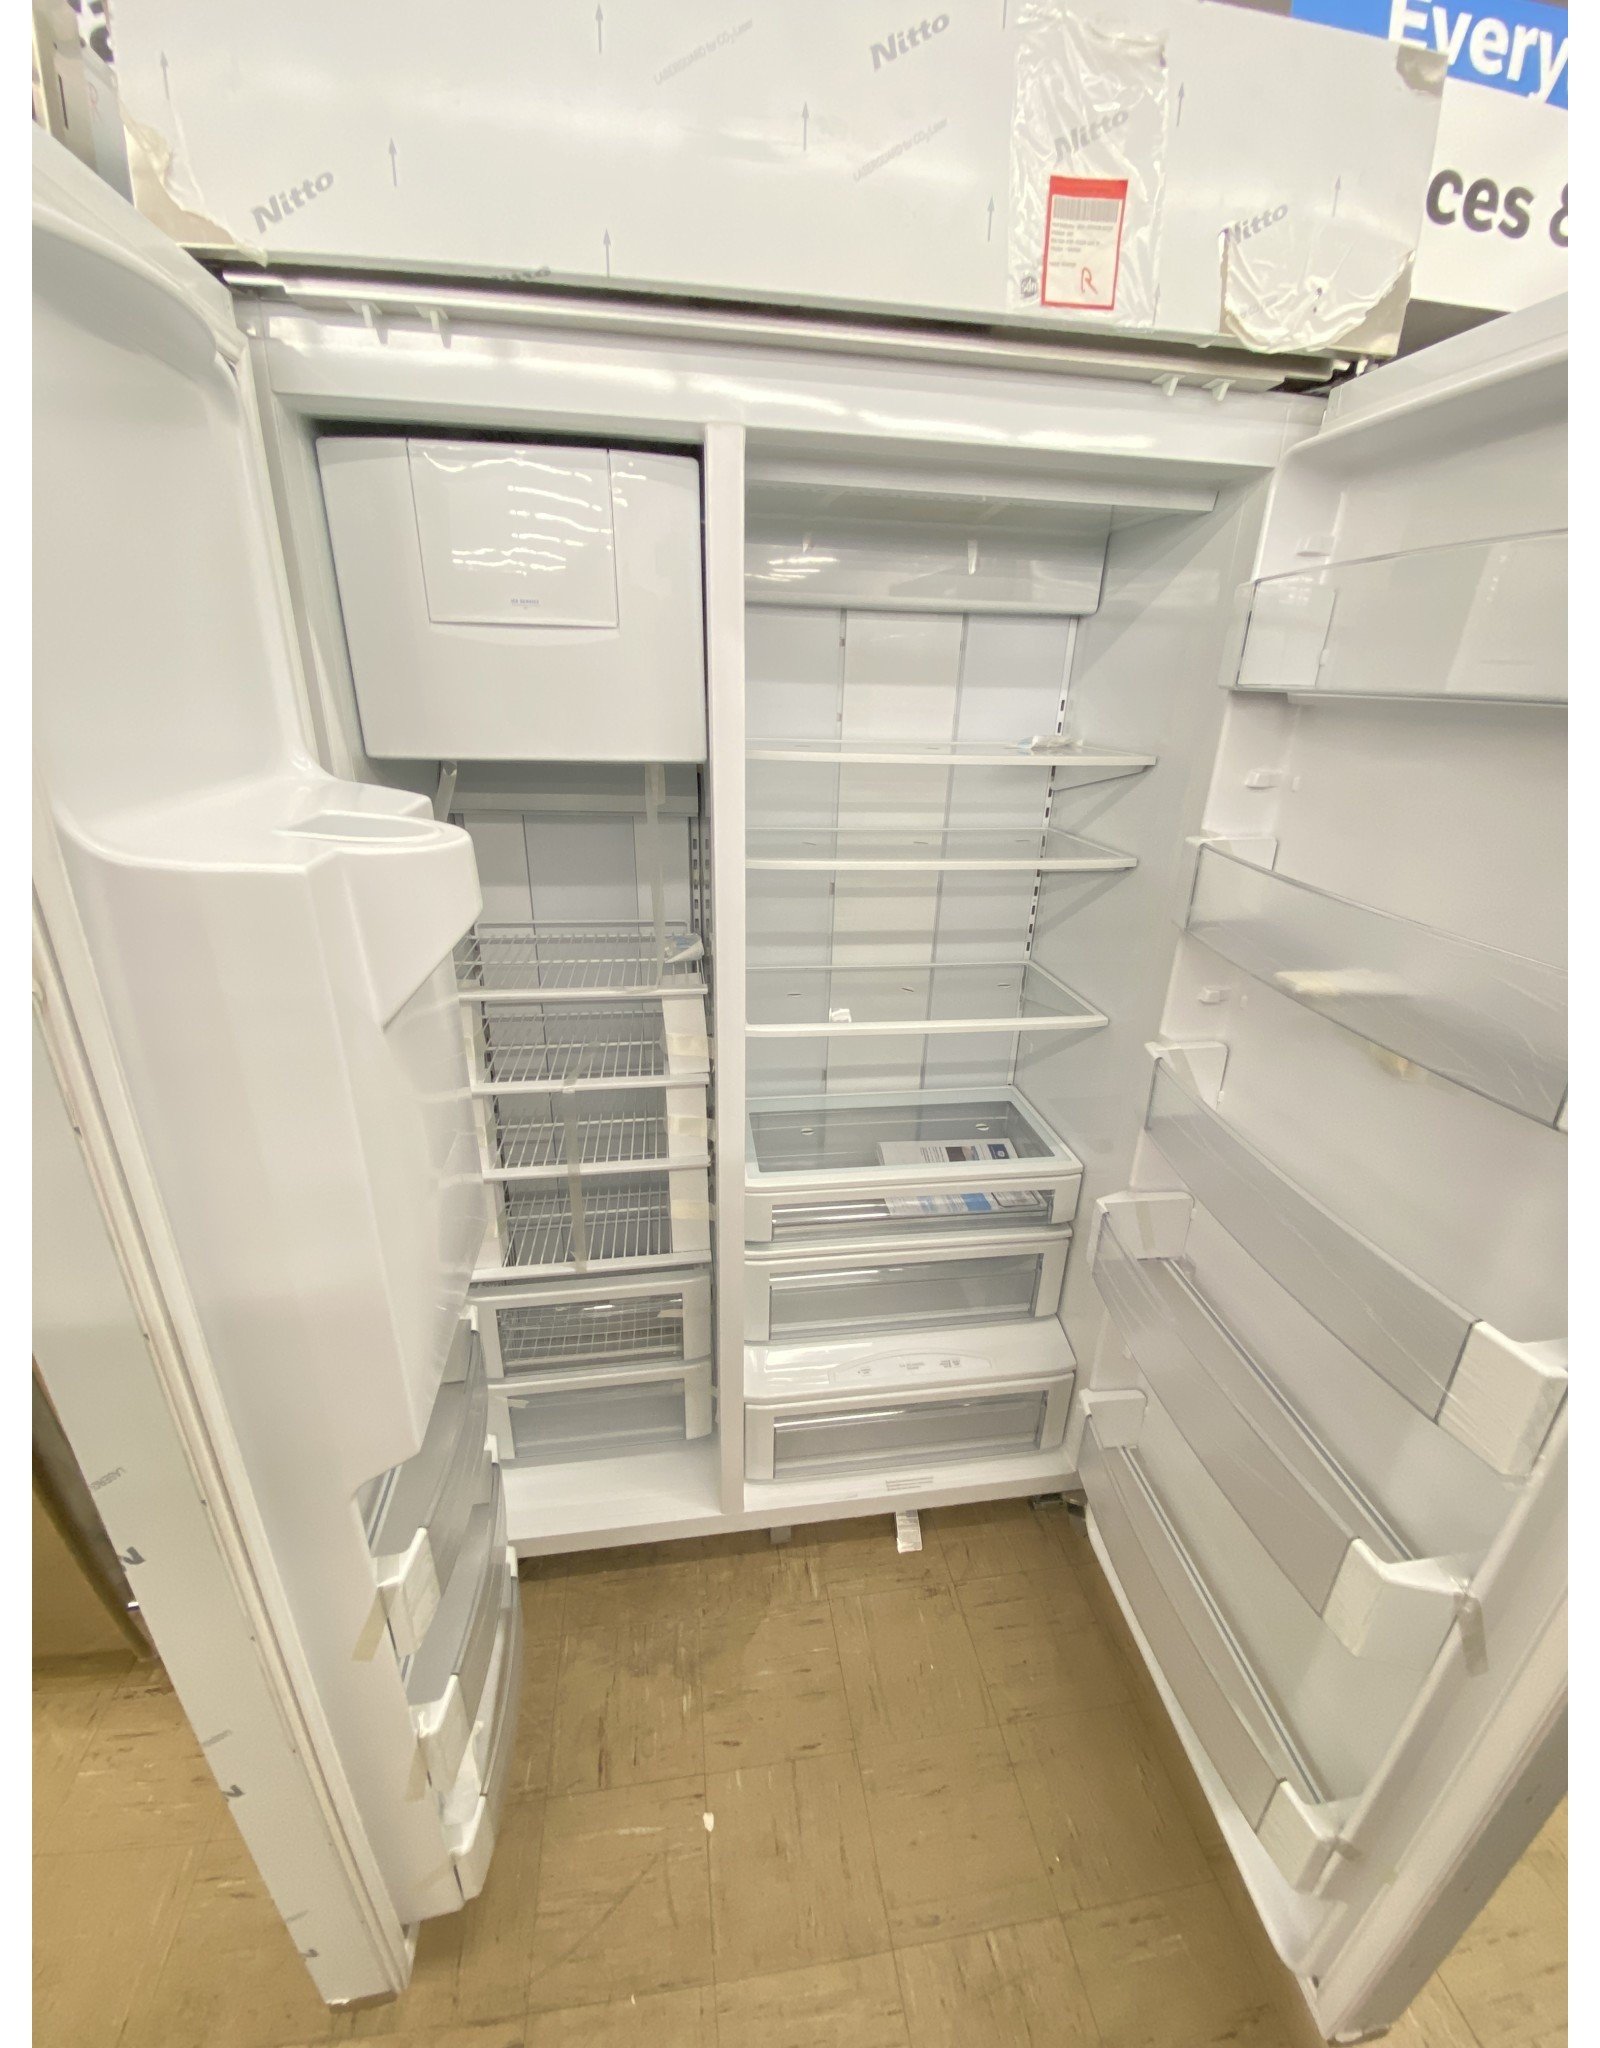 GE PROFILE PSB48YSKSS Profile 28.7 cu. ft. Built-In Side by Side Refrigerator in Stainless Steel